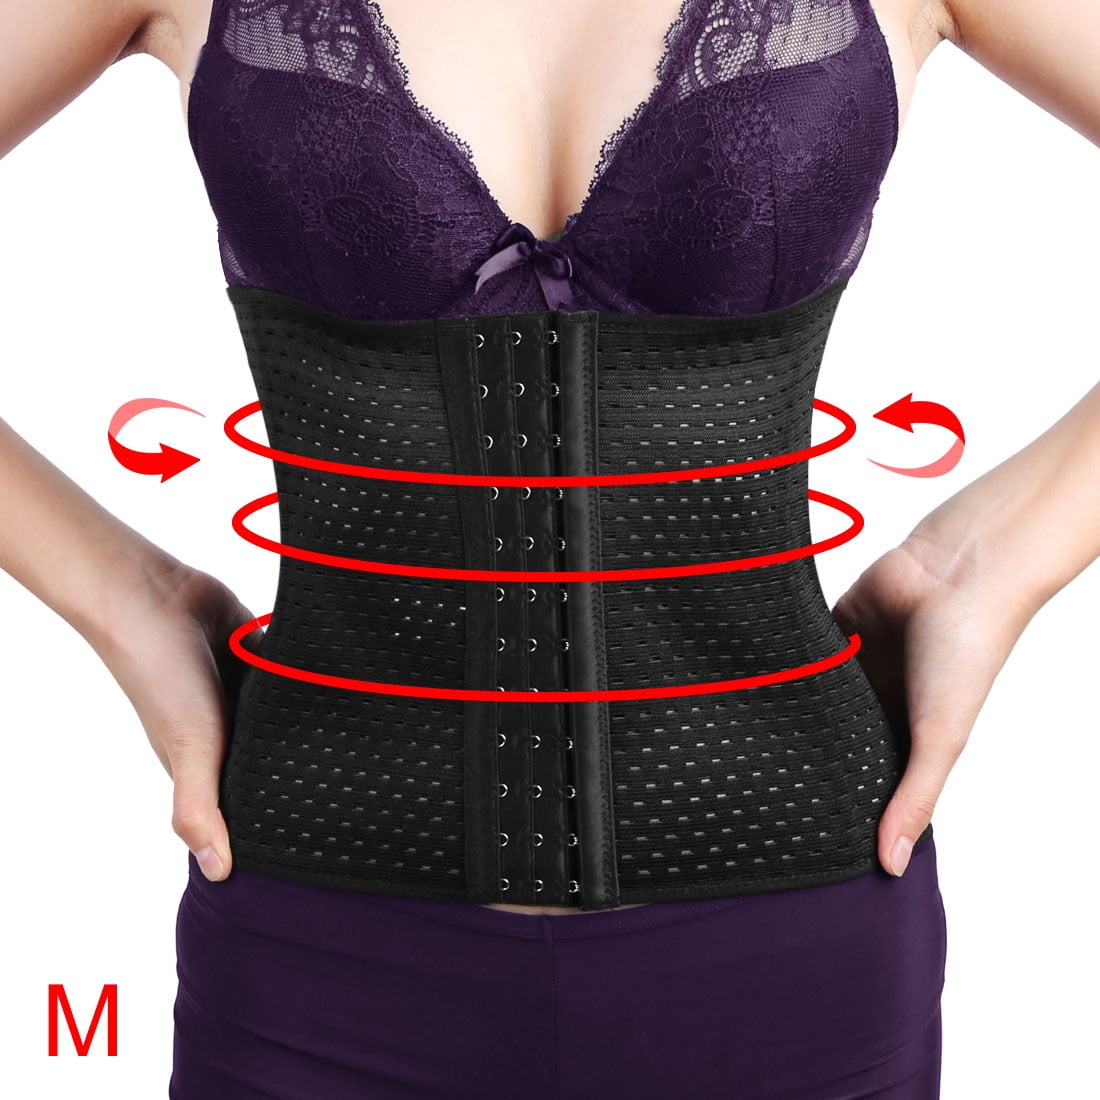 Waist Trainer for Women,Womens Tops Shapewear Corset Cincher Body Shaper Sport Girdle Trimmer with Stretchable Belt